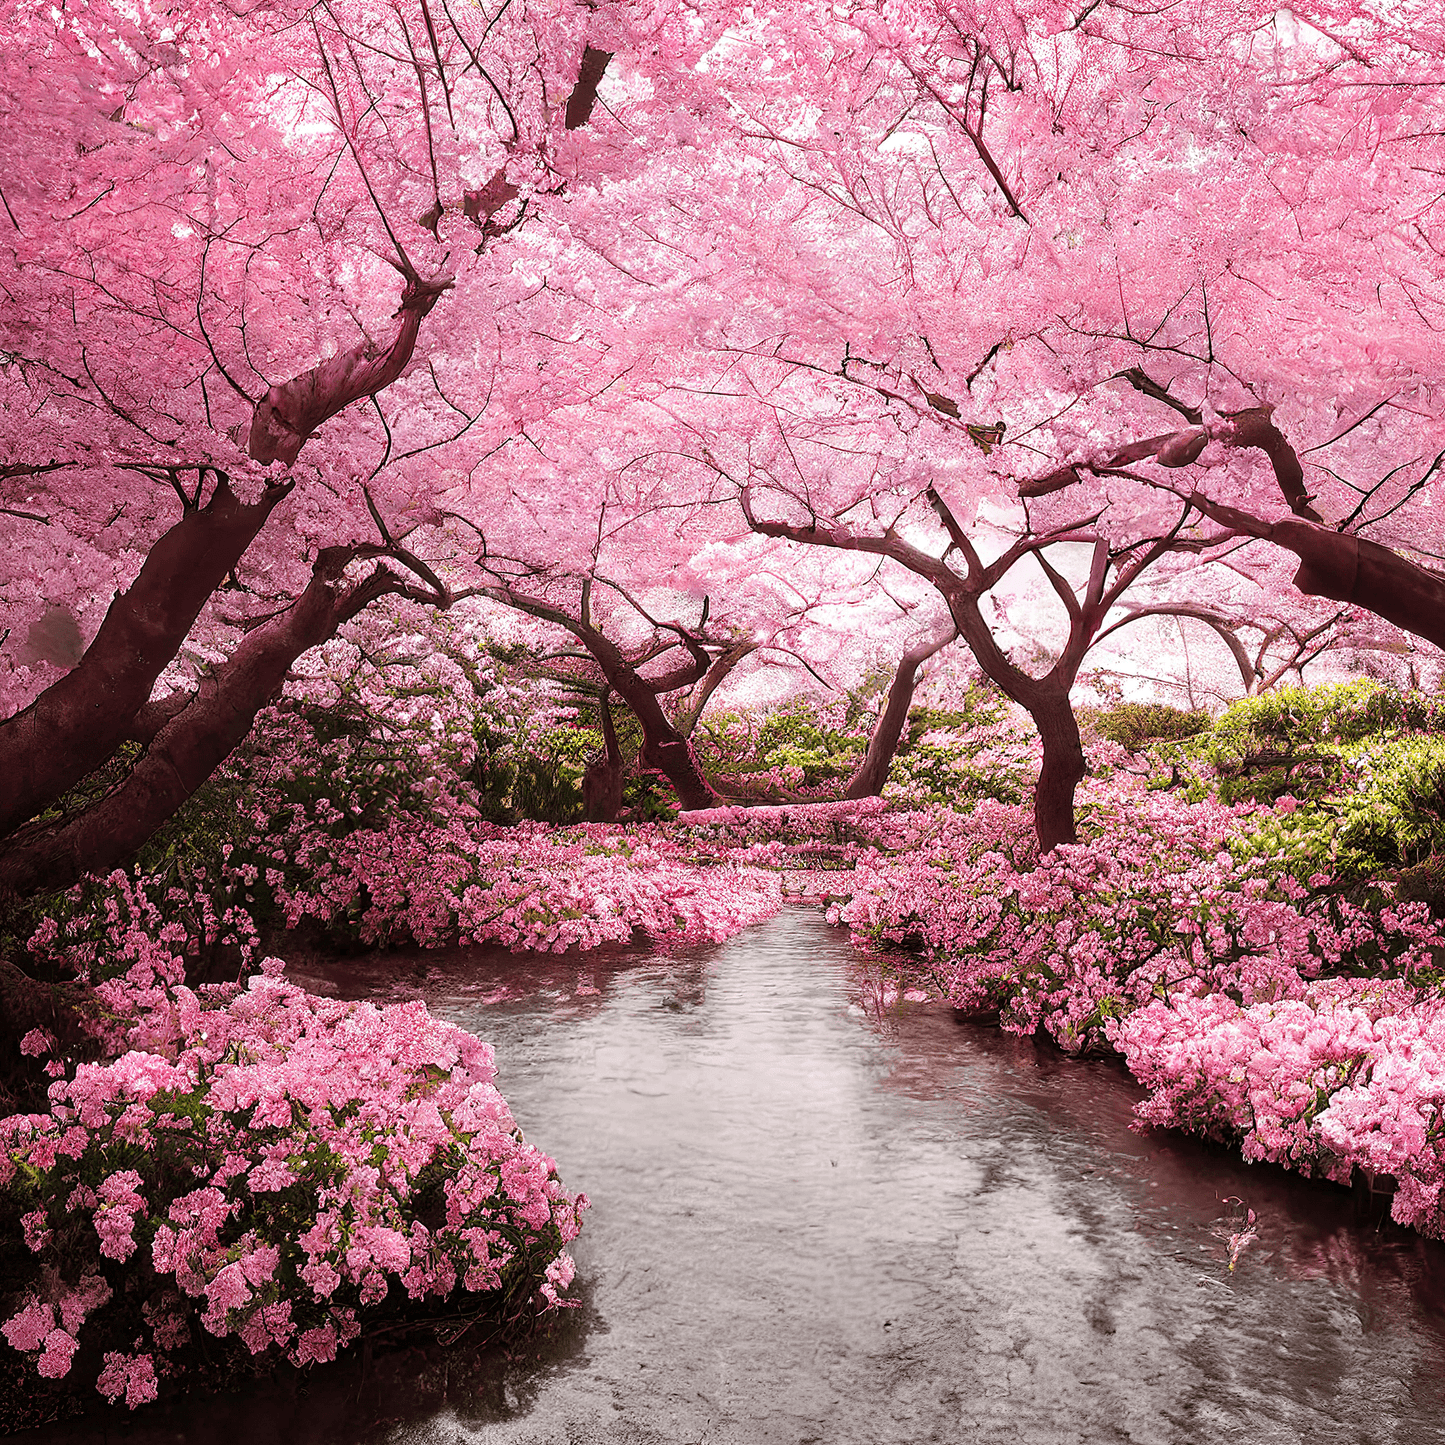 Load image into Gallery viewer, Cherry Blossom
